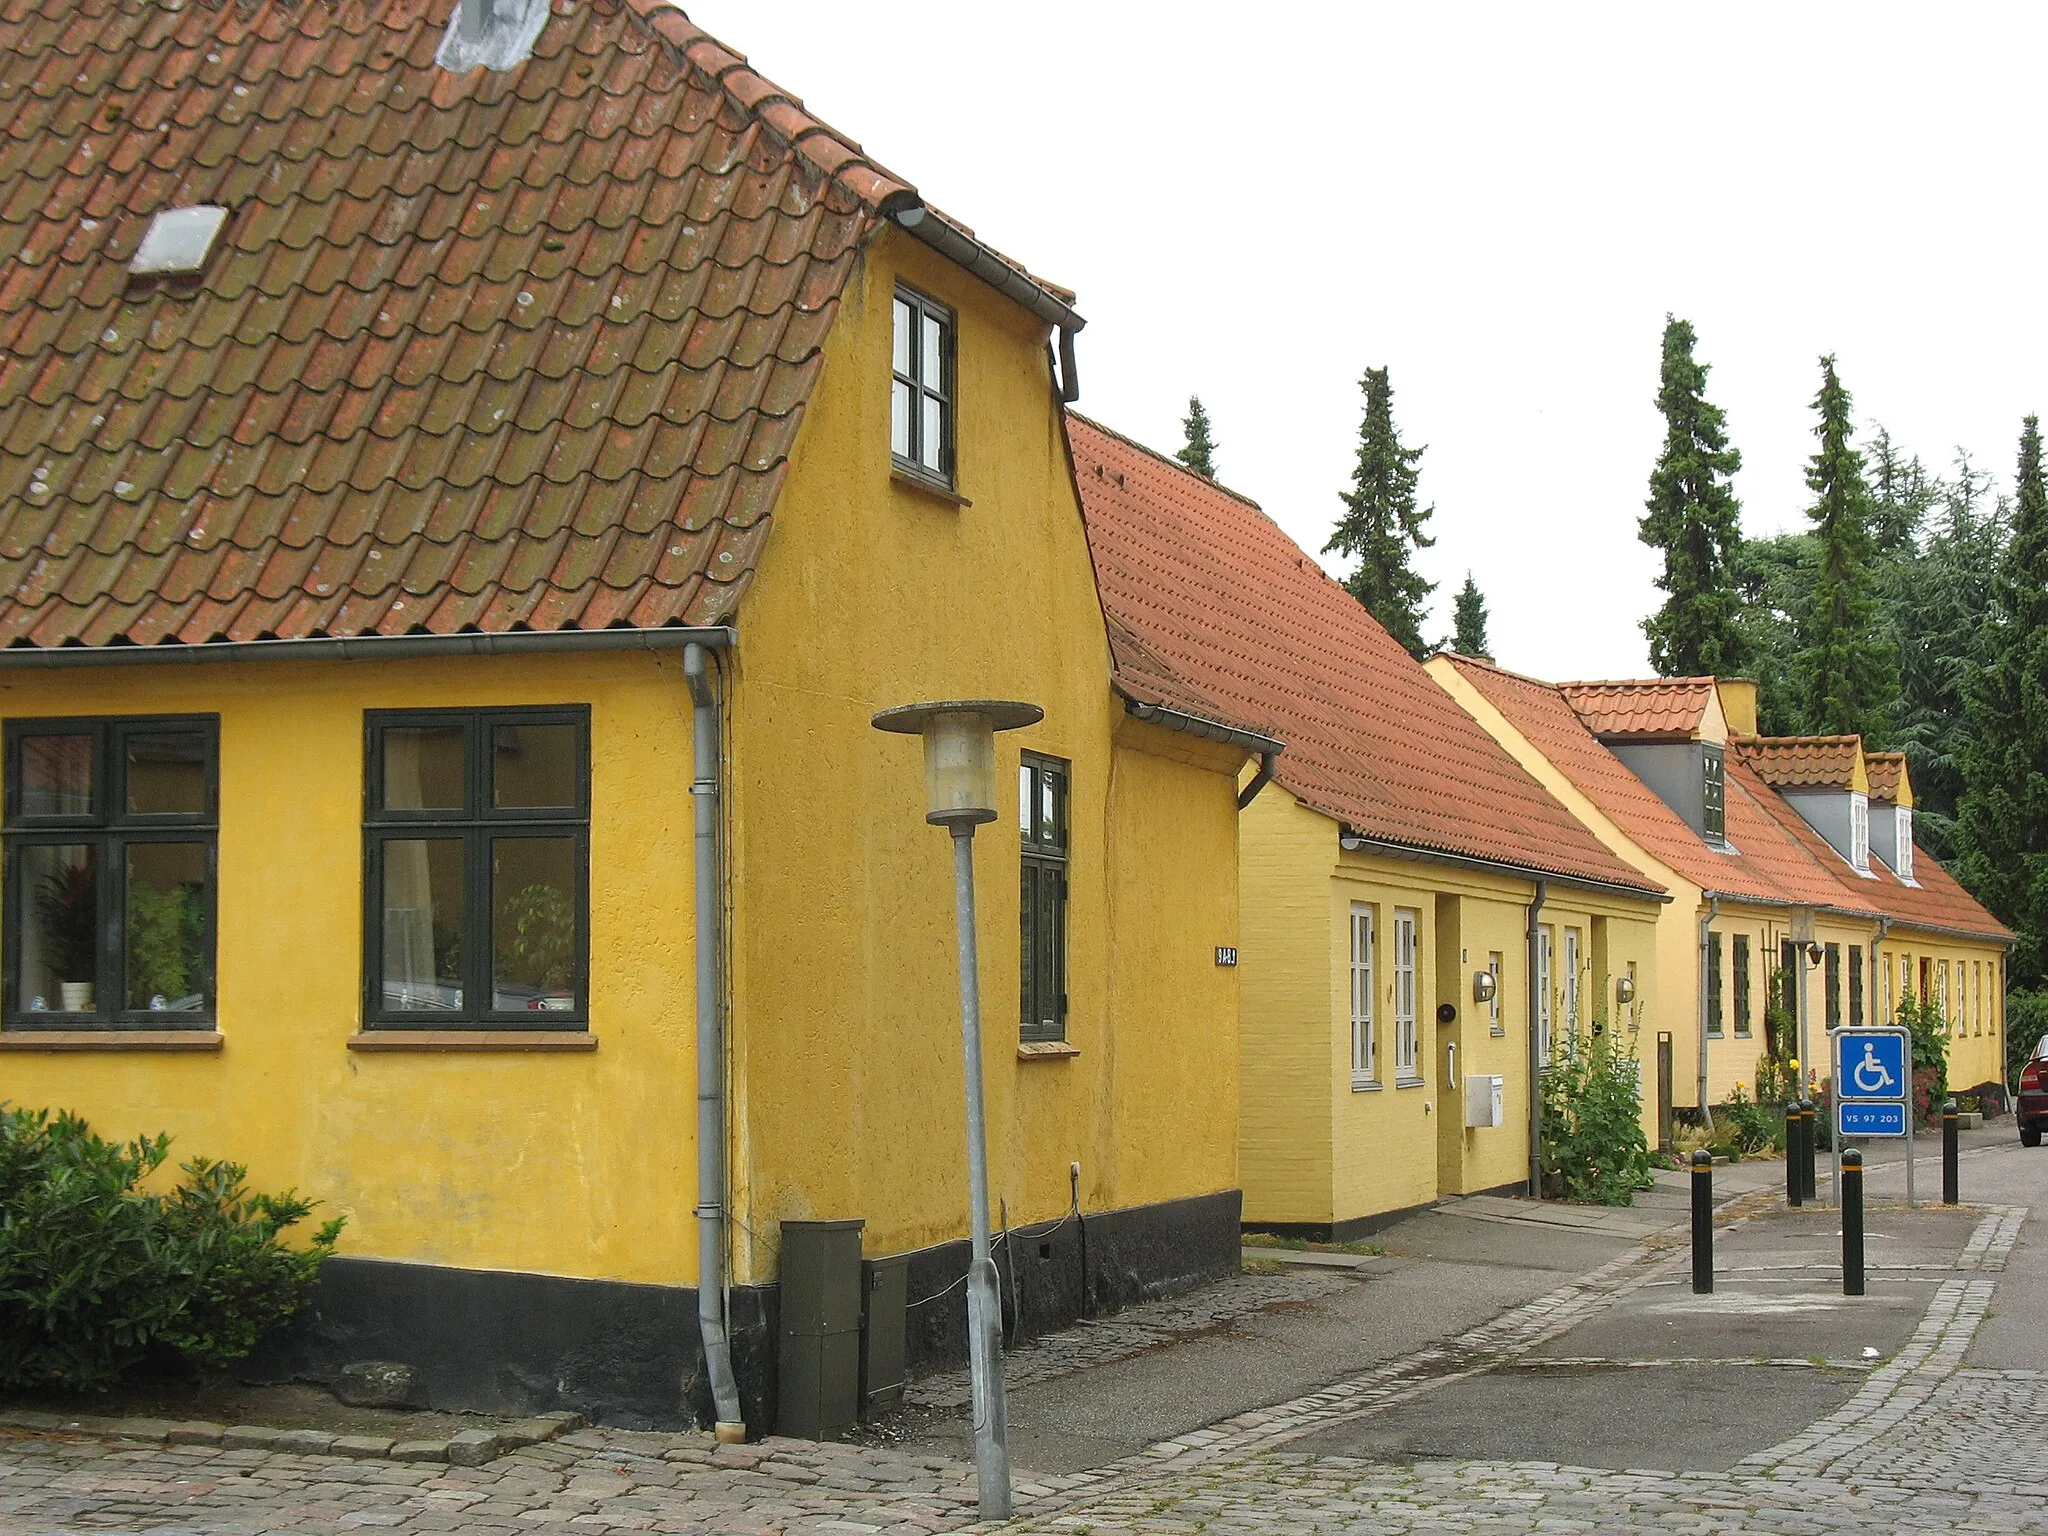 Photo showing: Old houses in the town "Maribo" located on the island Lolland in east Denmark.